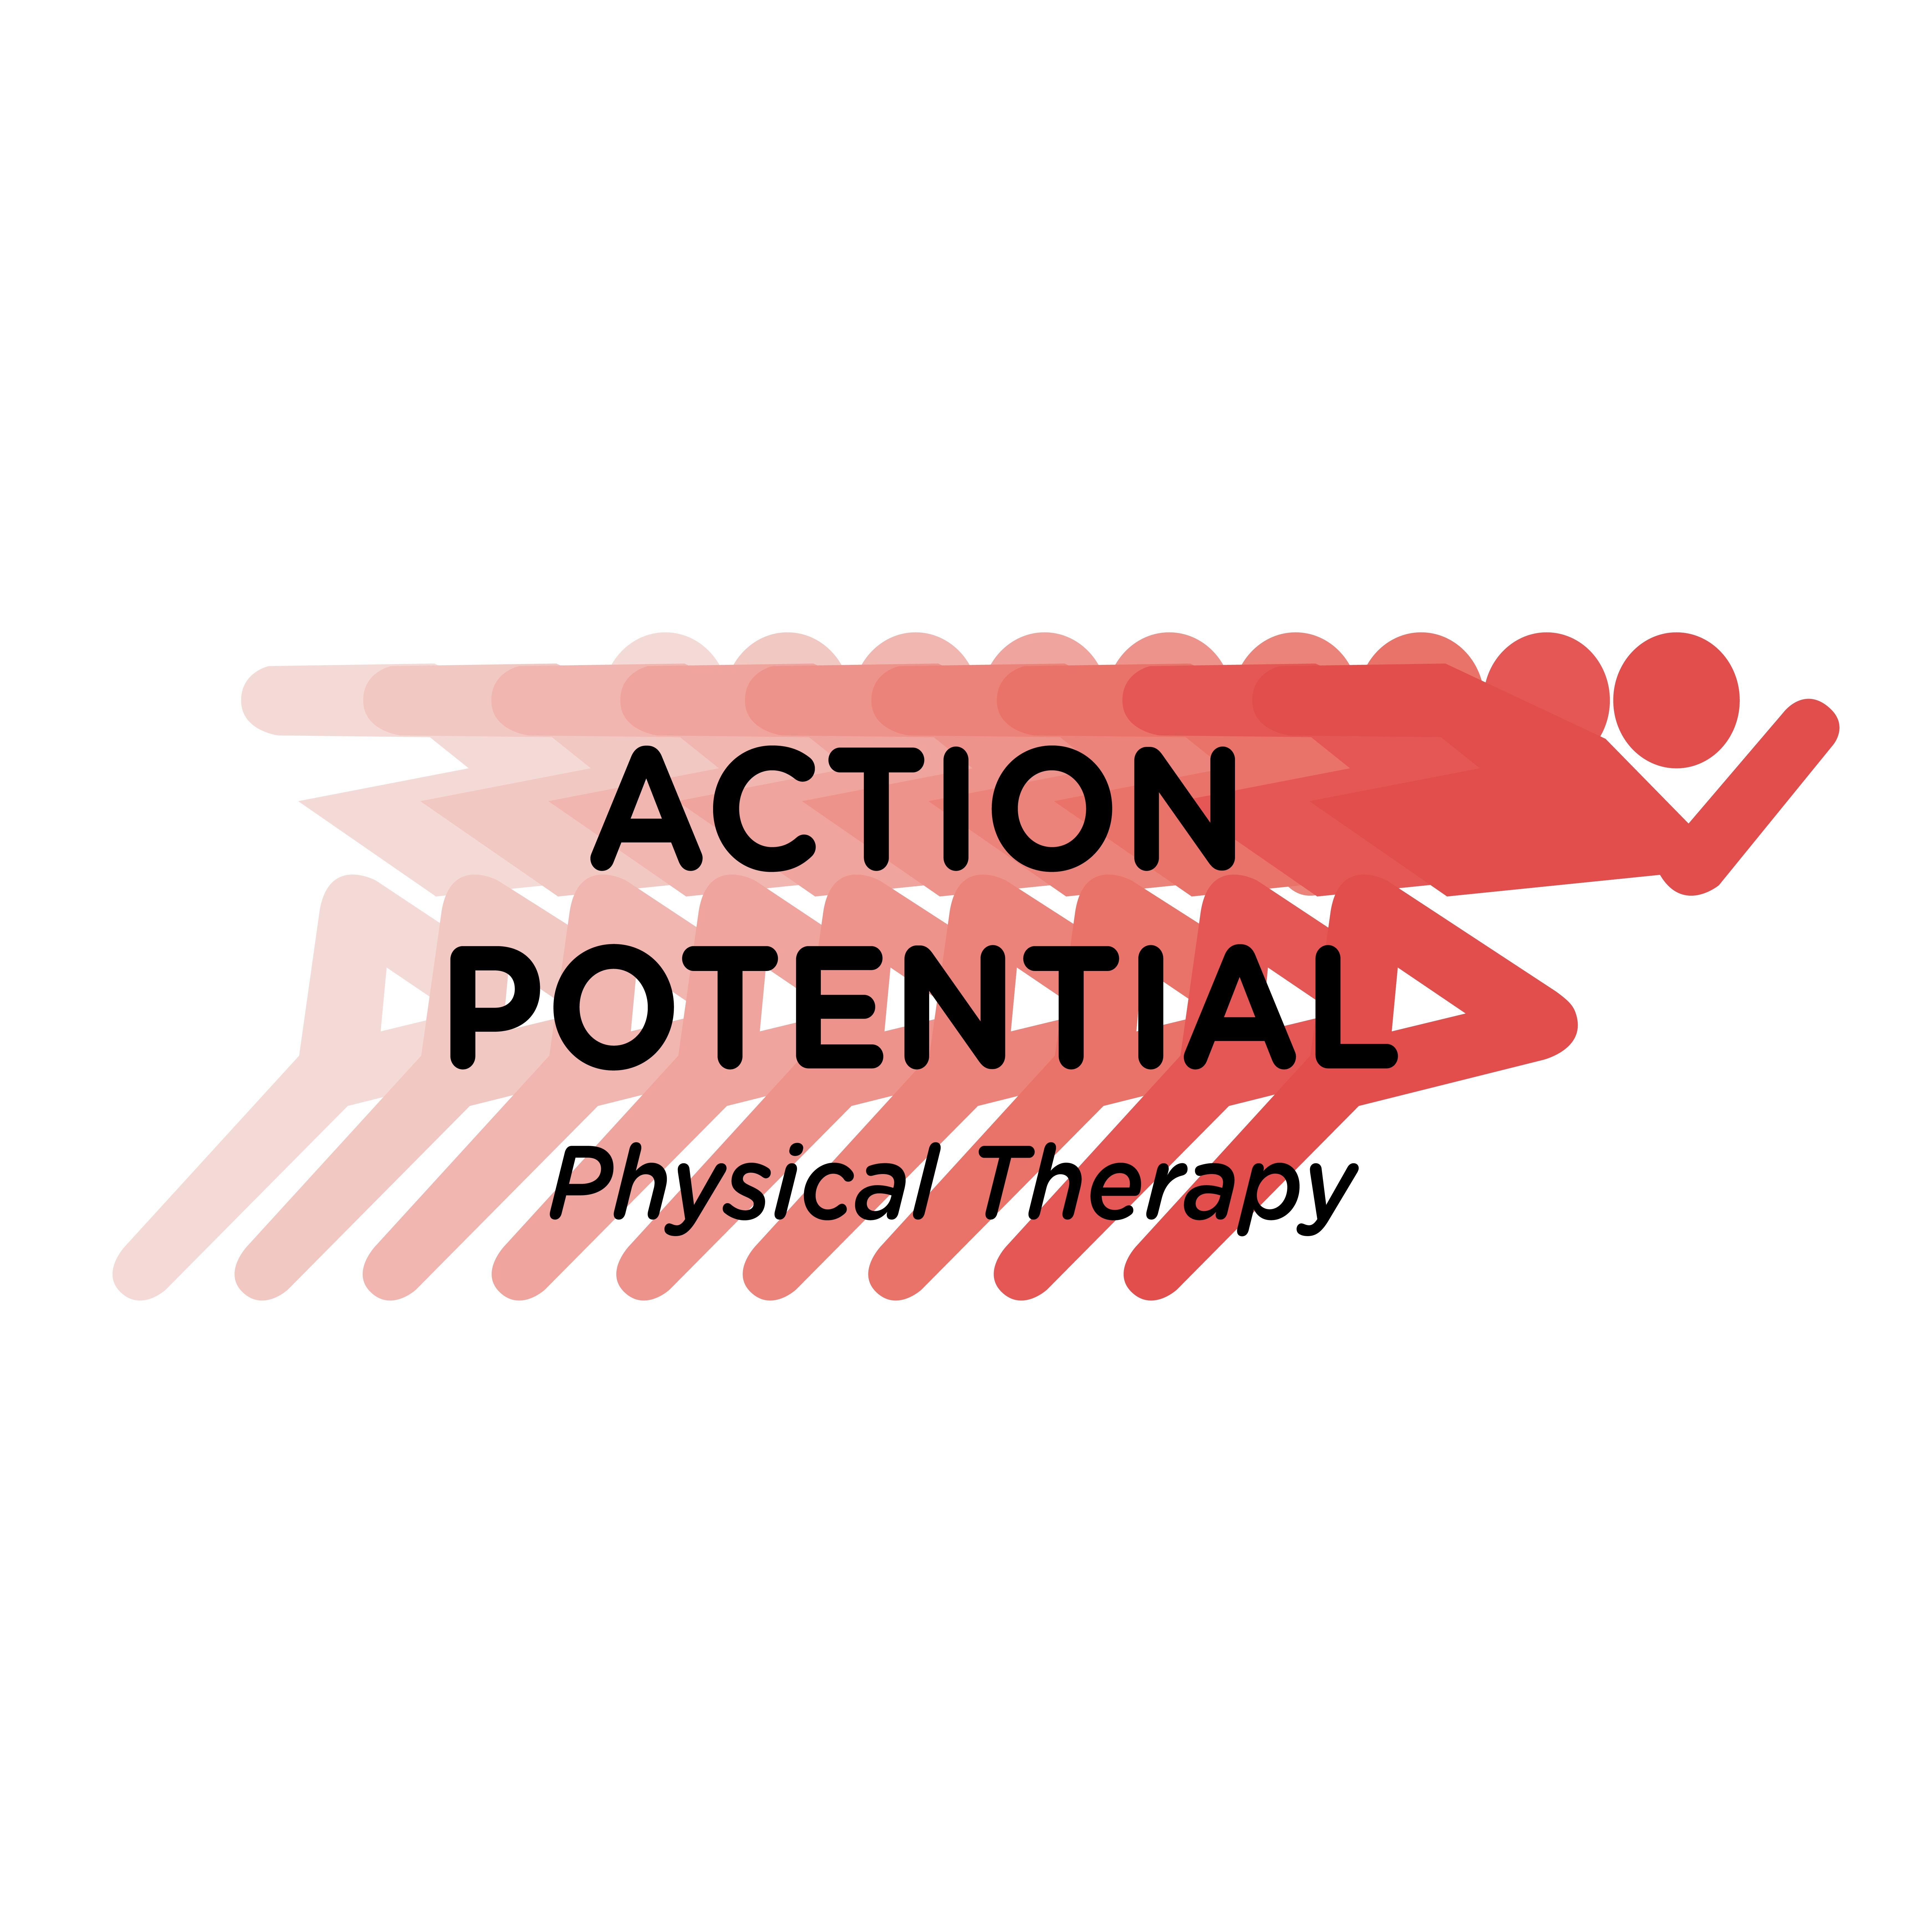 Action Potential Physical Therapy - Colorado Springs, Research Pkwy.